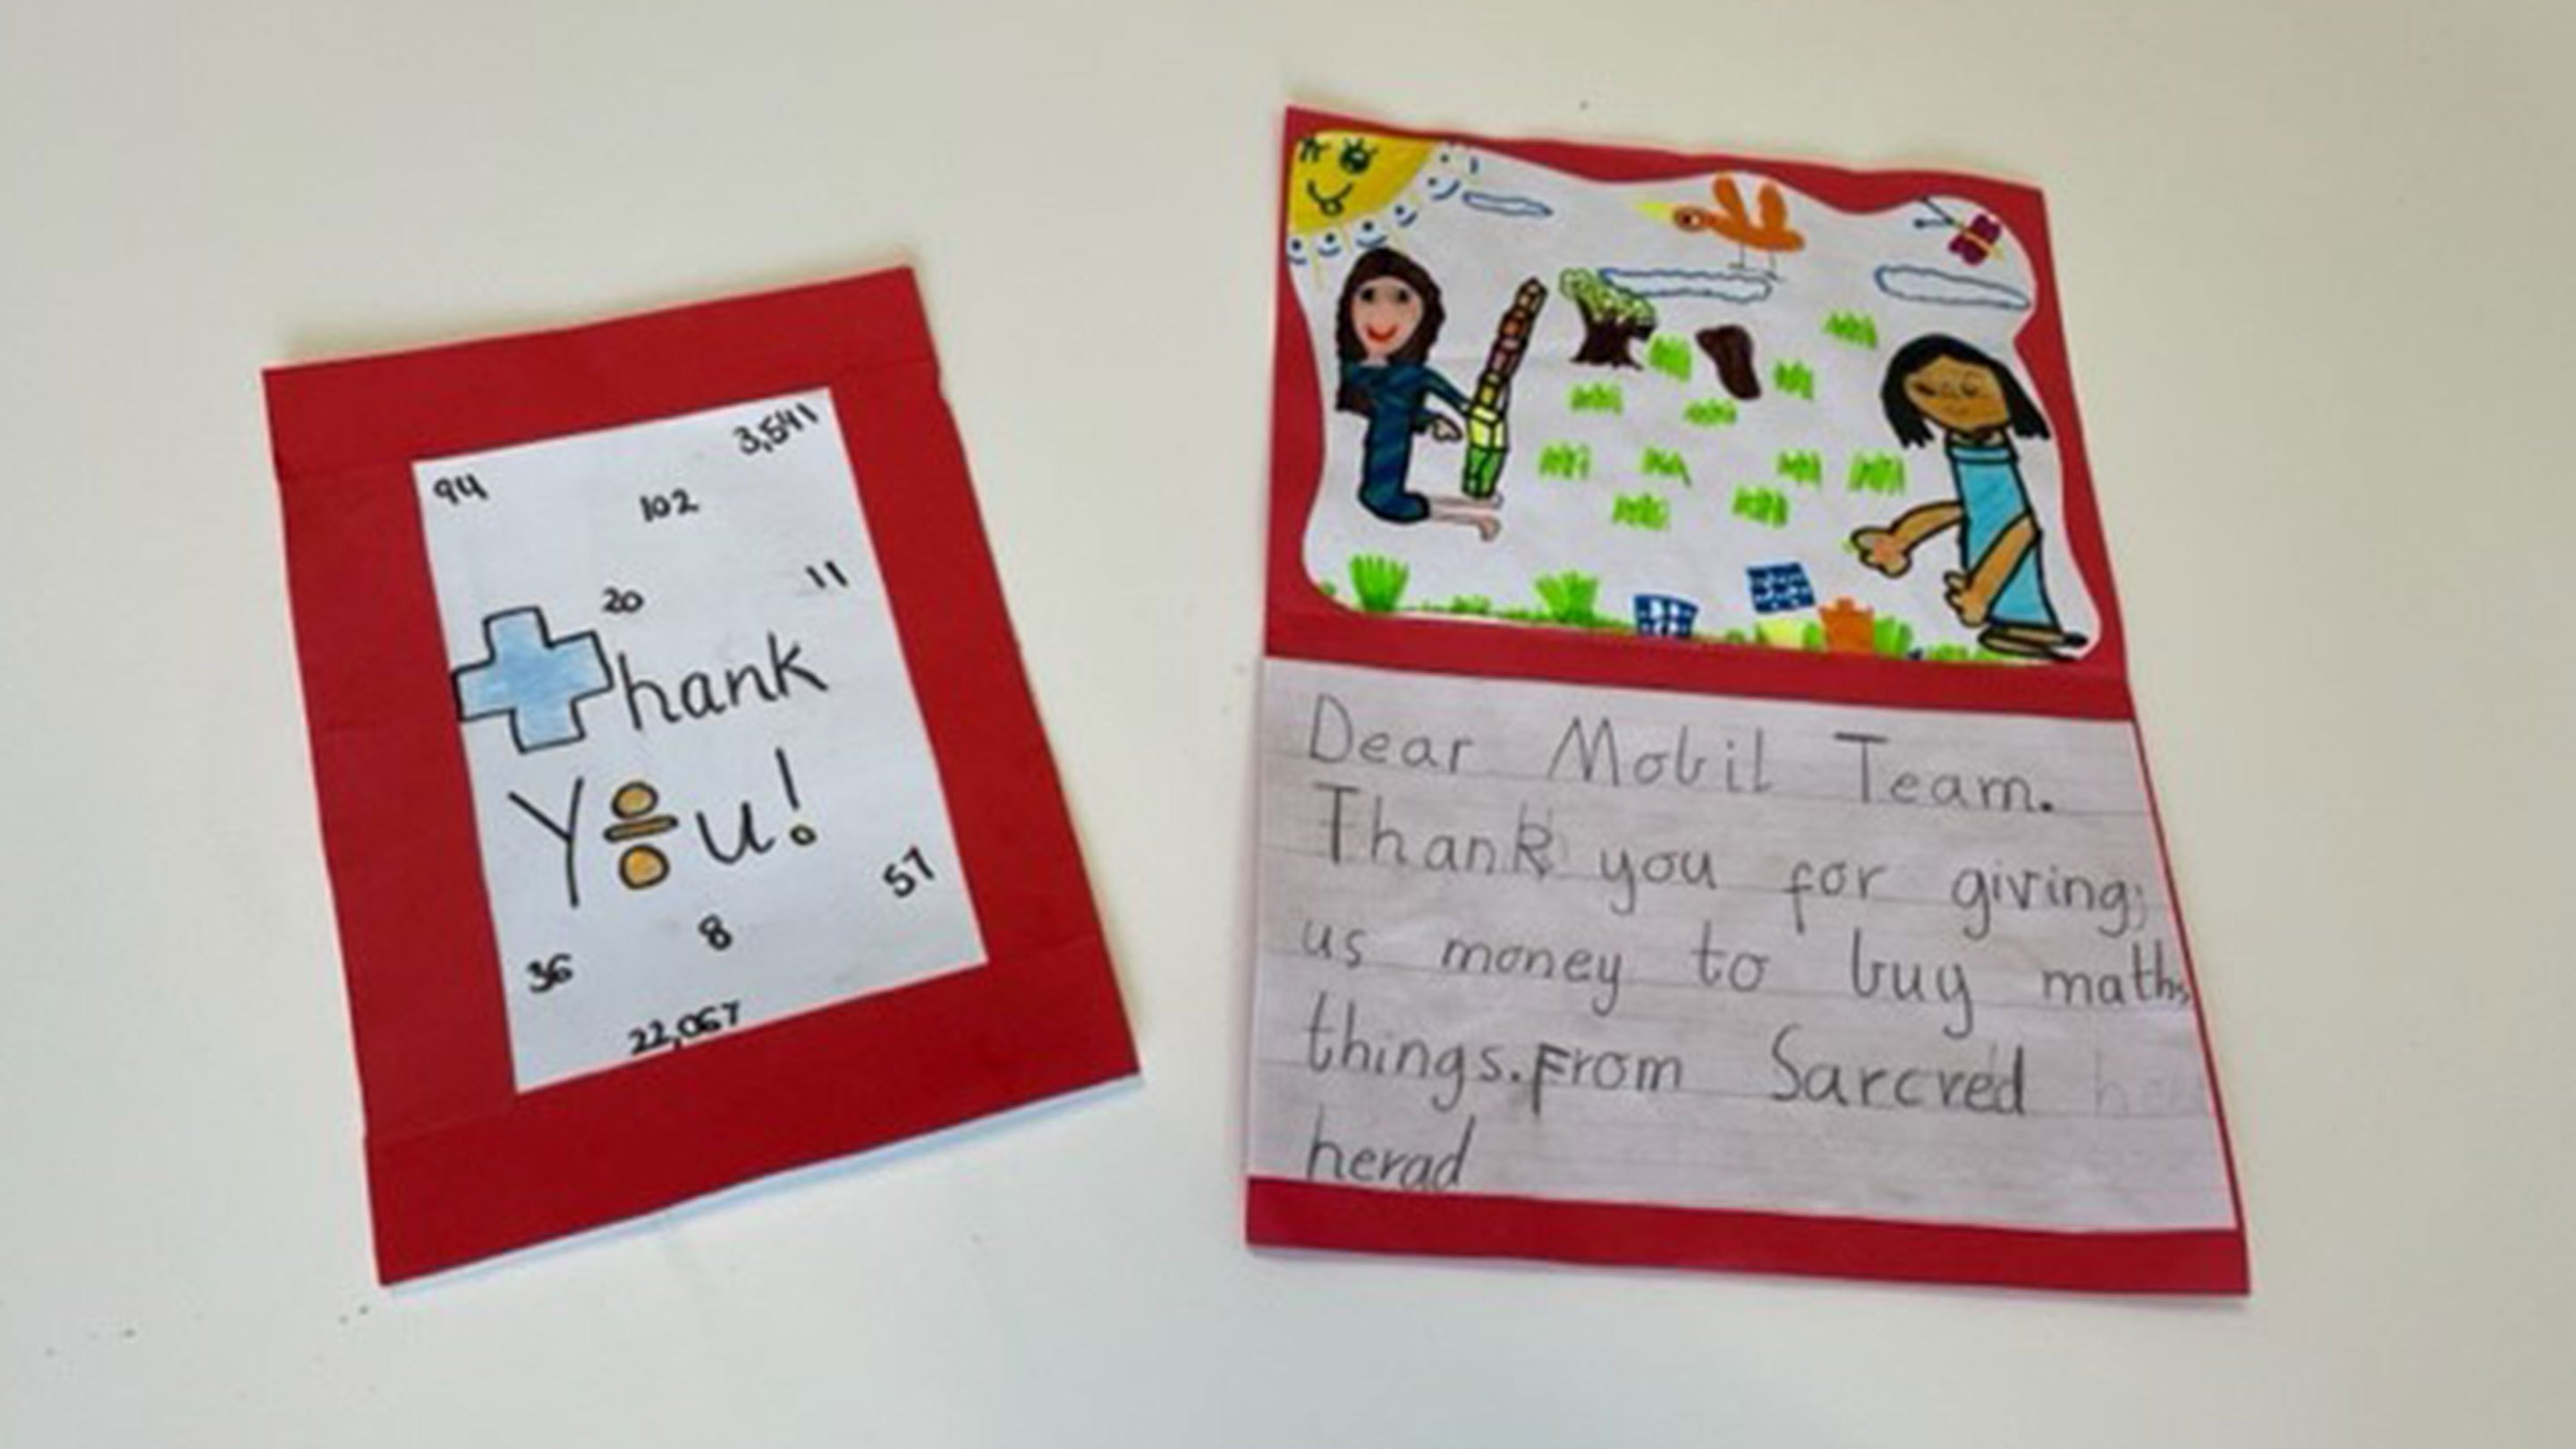 Thank you cards made by students were presented to the Mobil Altona team at the school assembly